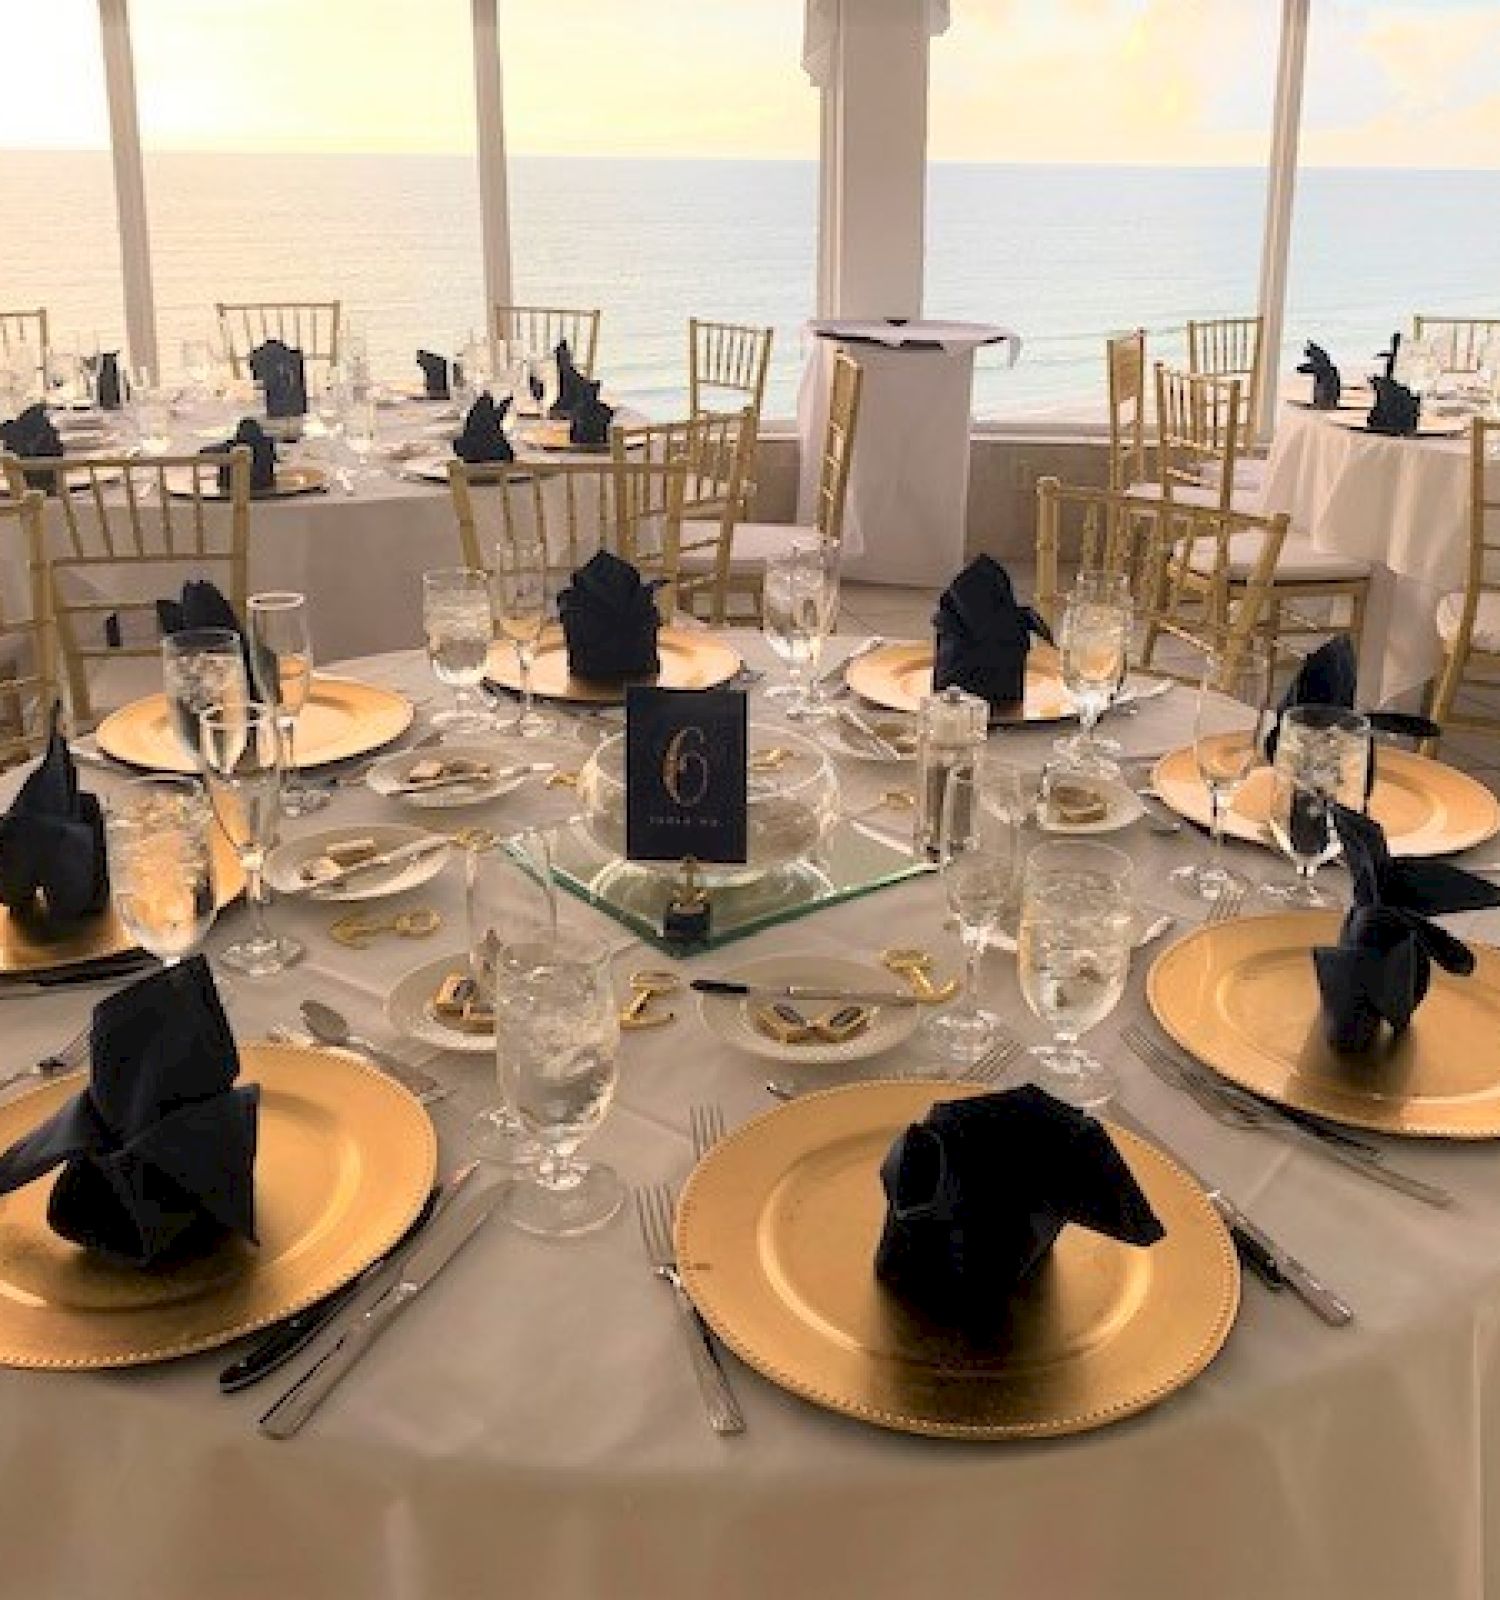 This image shows elegantly set round tables with gold plates, black napkins, and glasses for an event, in a room with a scenic view of the ocean.